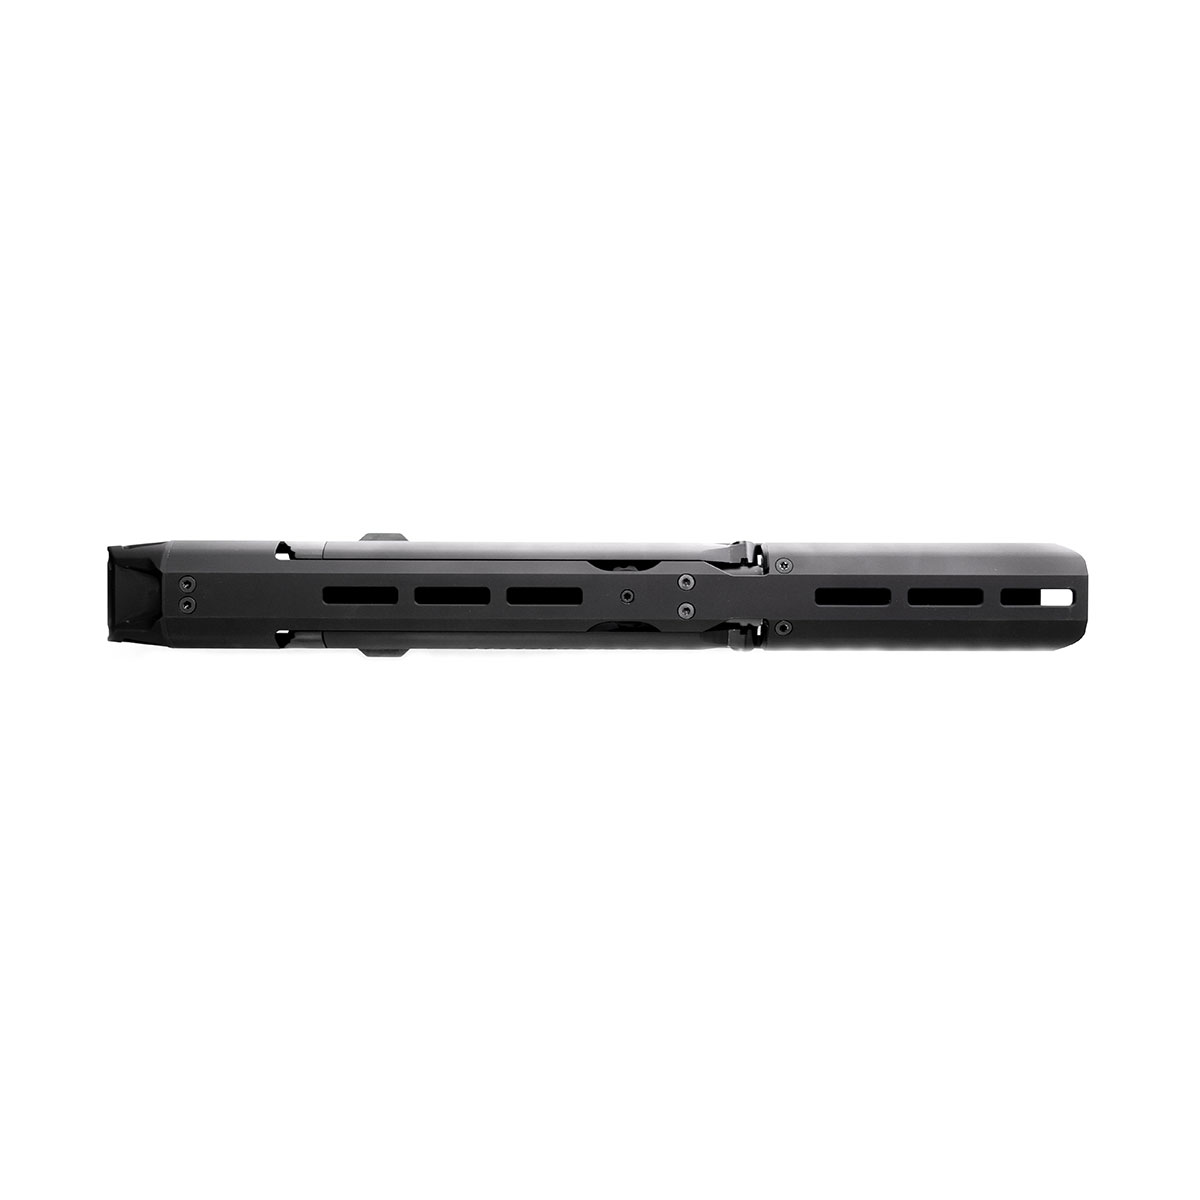 BLK LBL CORPORATION BIPODS FOR AR-15 RIFLE